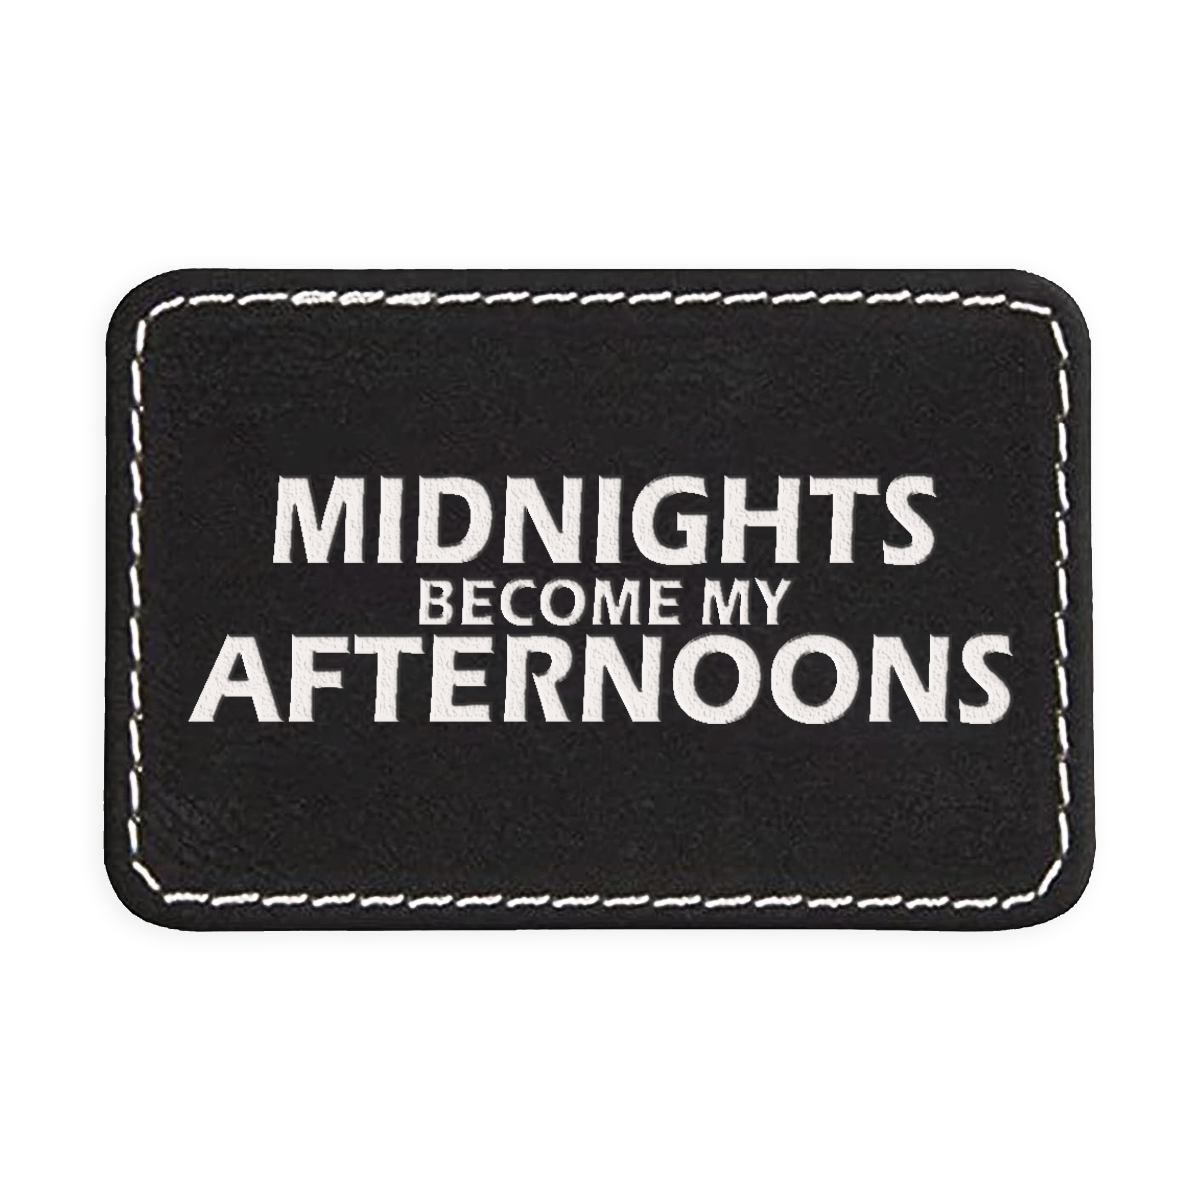 Midnights Become My Afternoons Engraved Patch